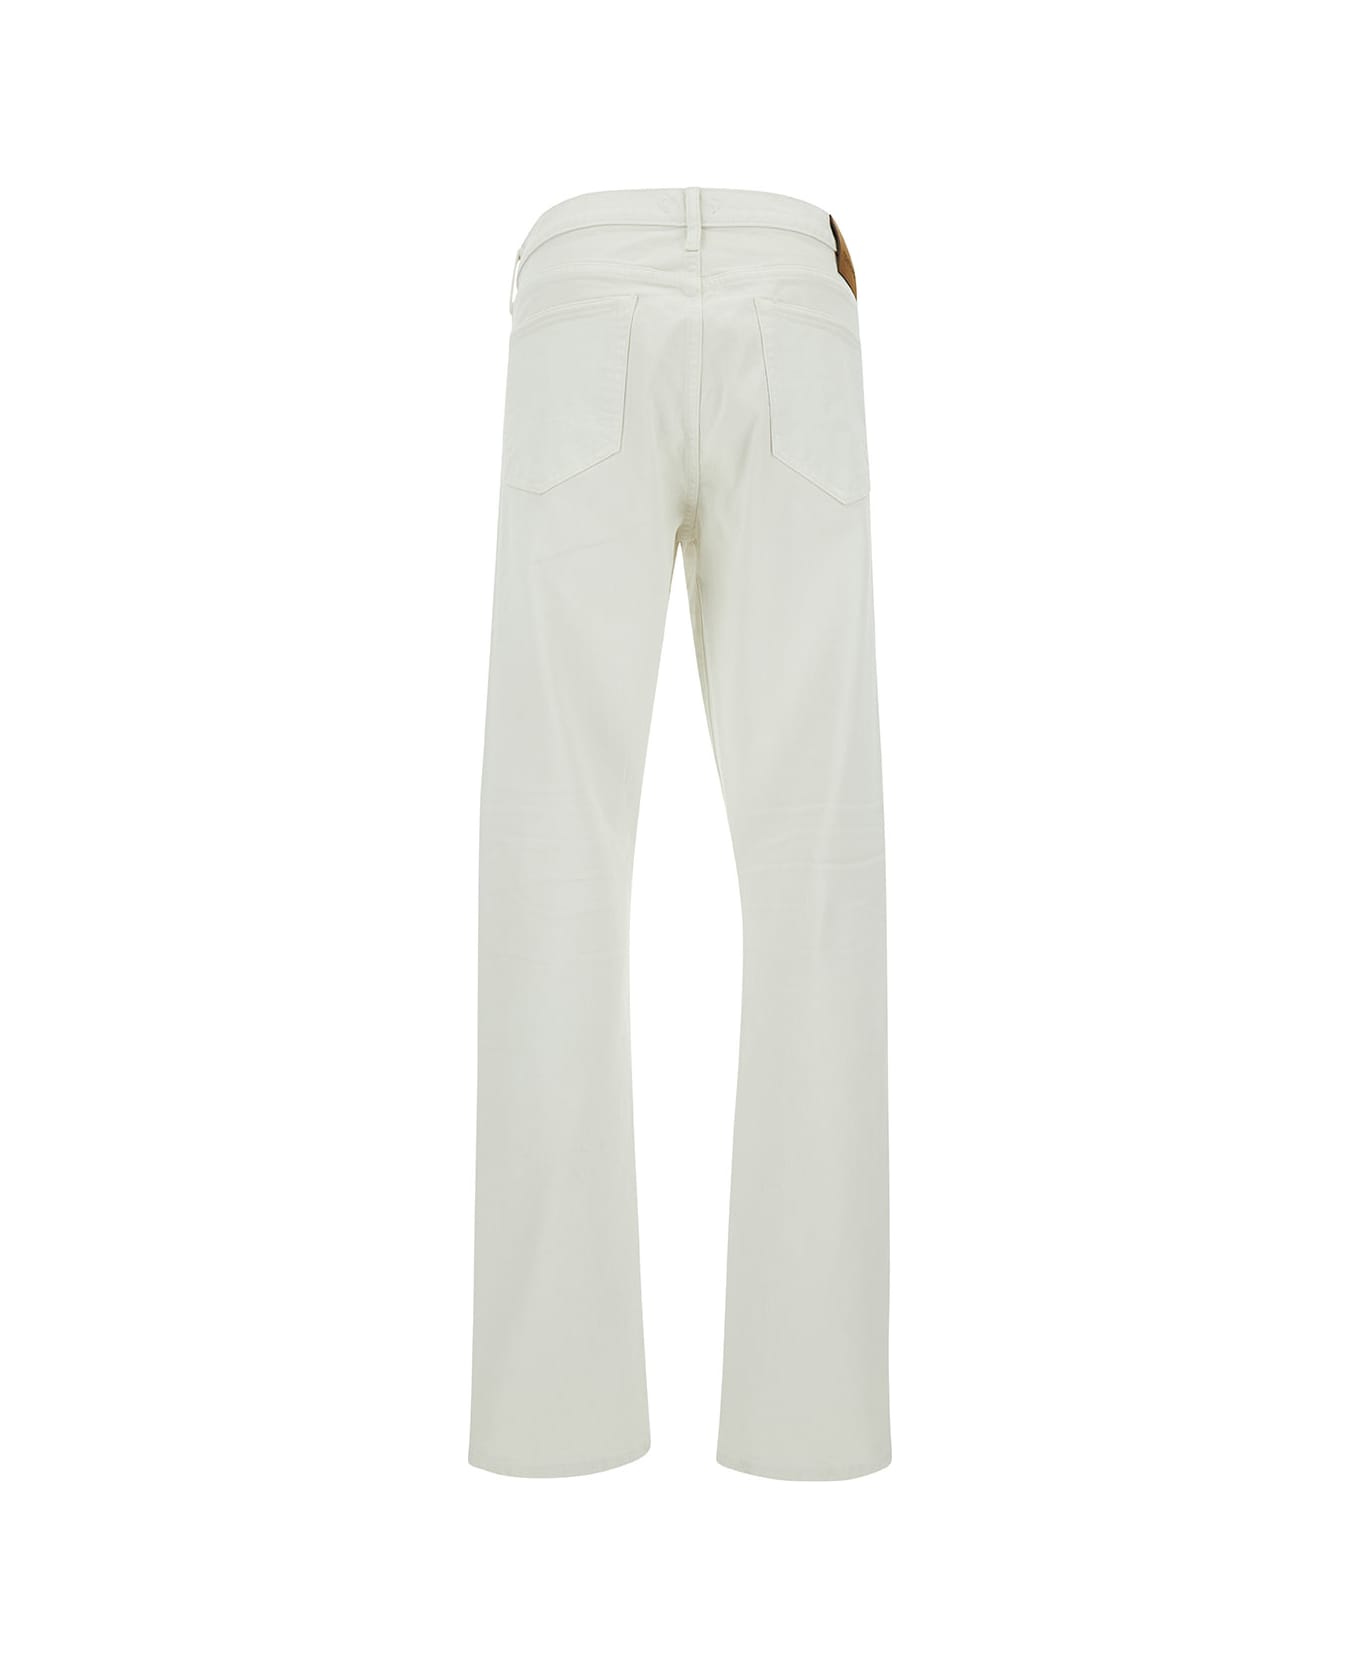 Tom Ford White Slim Five-pocket Style Jeans With Branded Button In Stretch Cotton Denim Man - White デニム